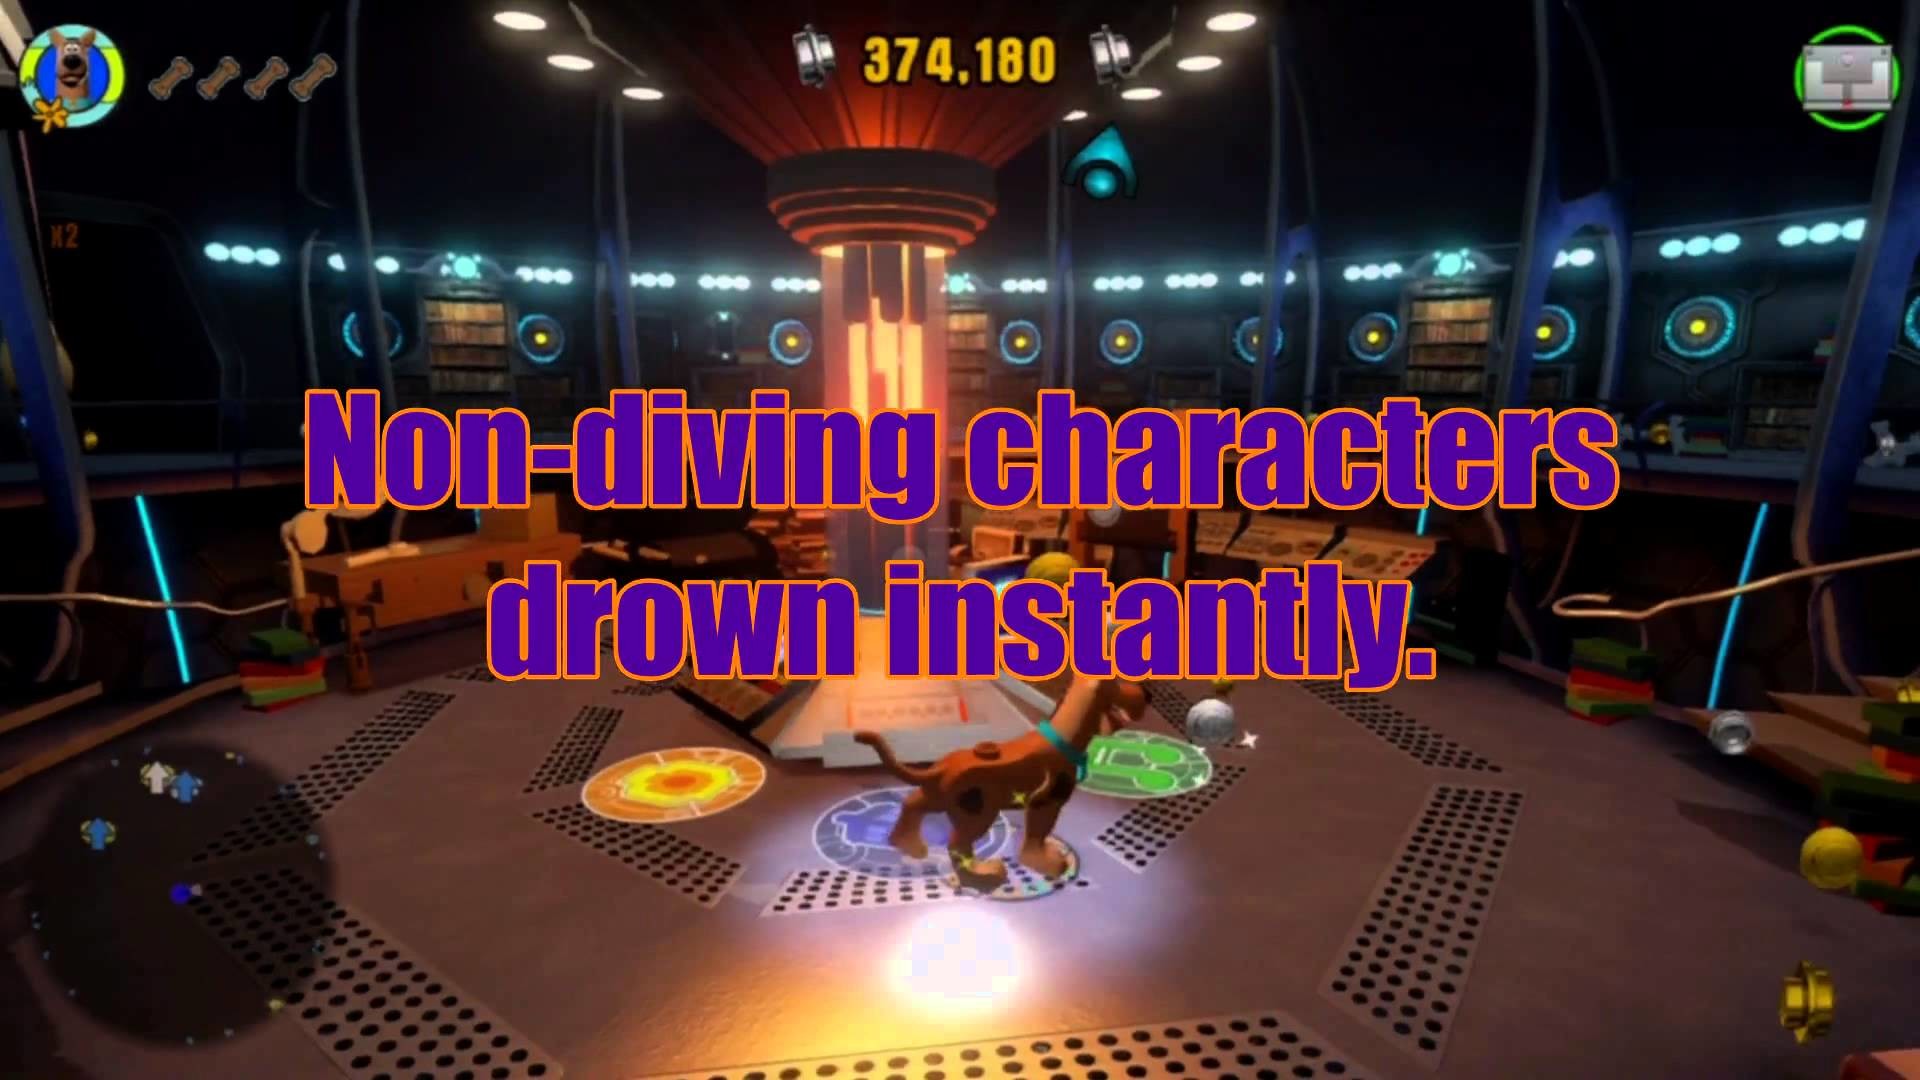 Glitch 2 Swimming / Diving / Drowning Inside TARDIS Interior LEGO Dimensions Scooby Doo / Doctor Who